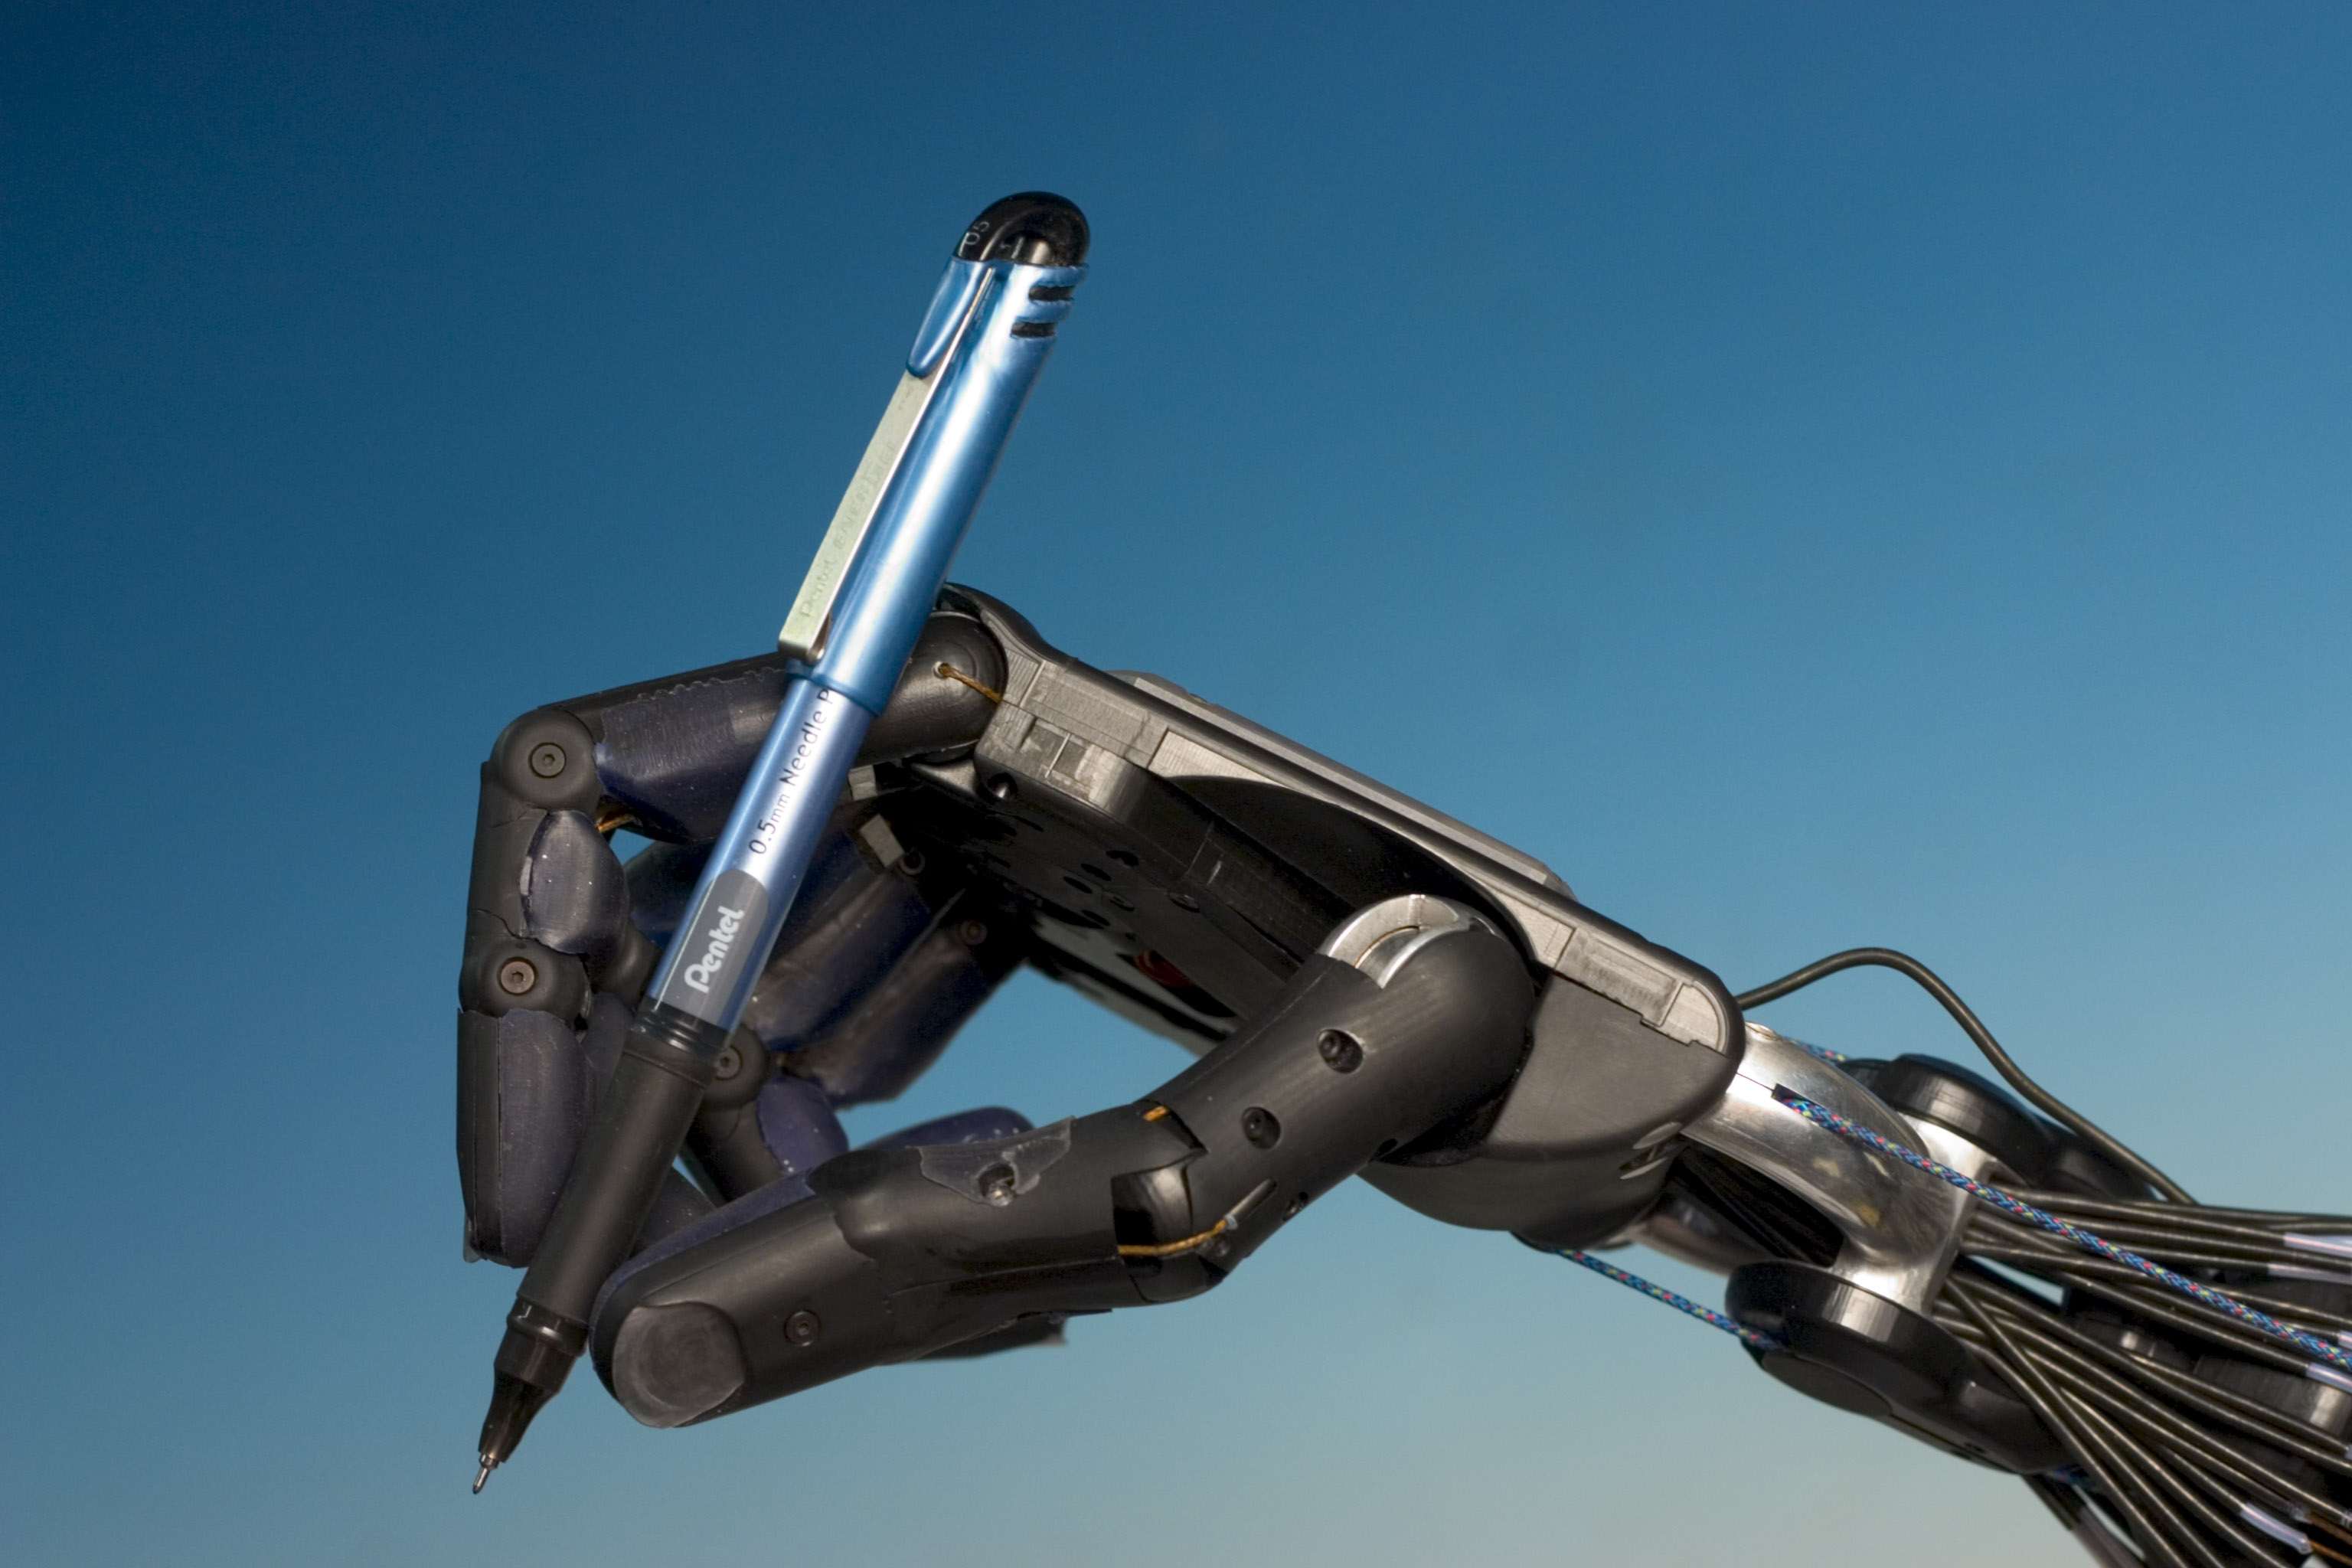 Newswise: Robot hands one step closer to human thanks to WMG AI algorithms